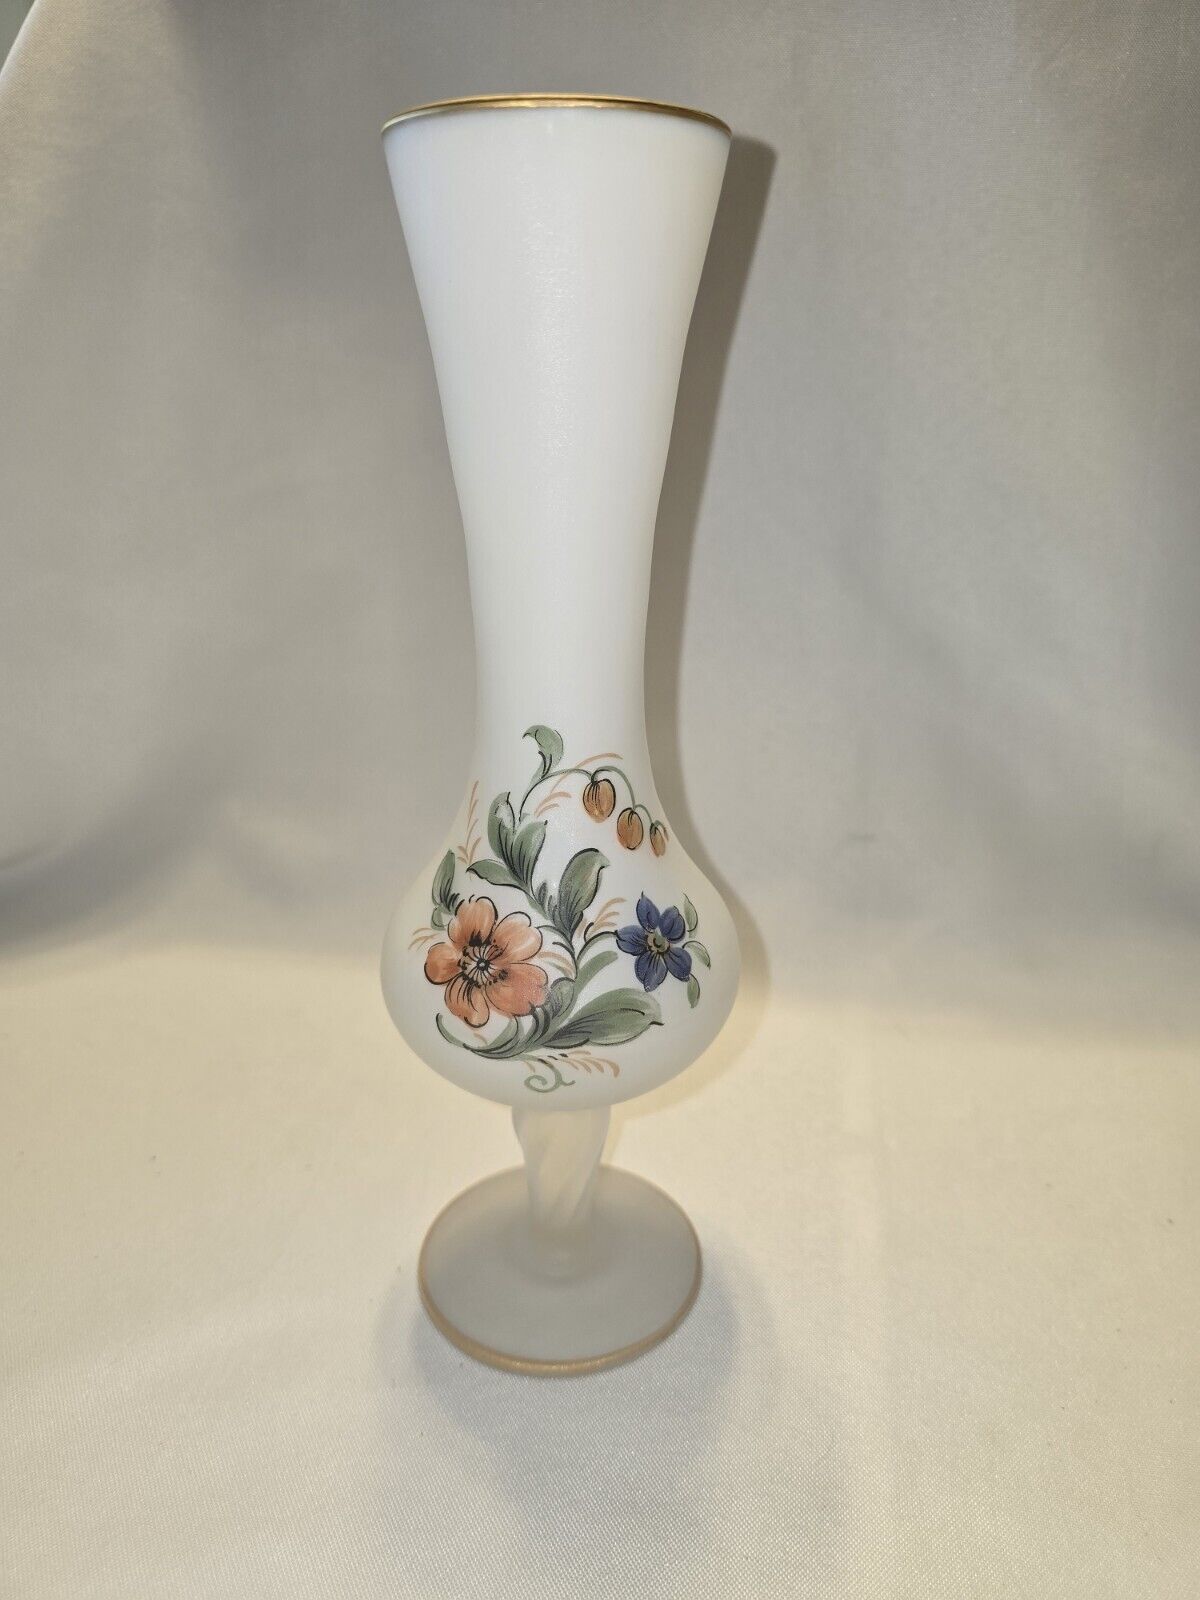 Bristol Frosted/Satin Glass Pedestal Vase Hand Painted Flowers 10”Tall